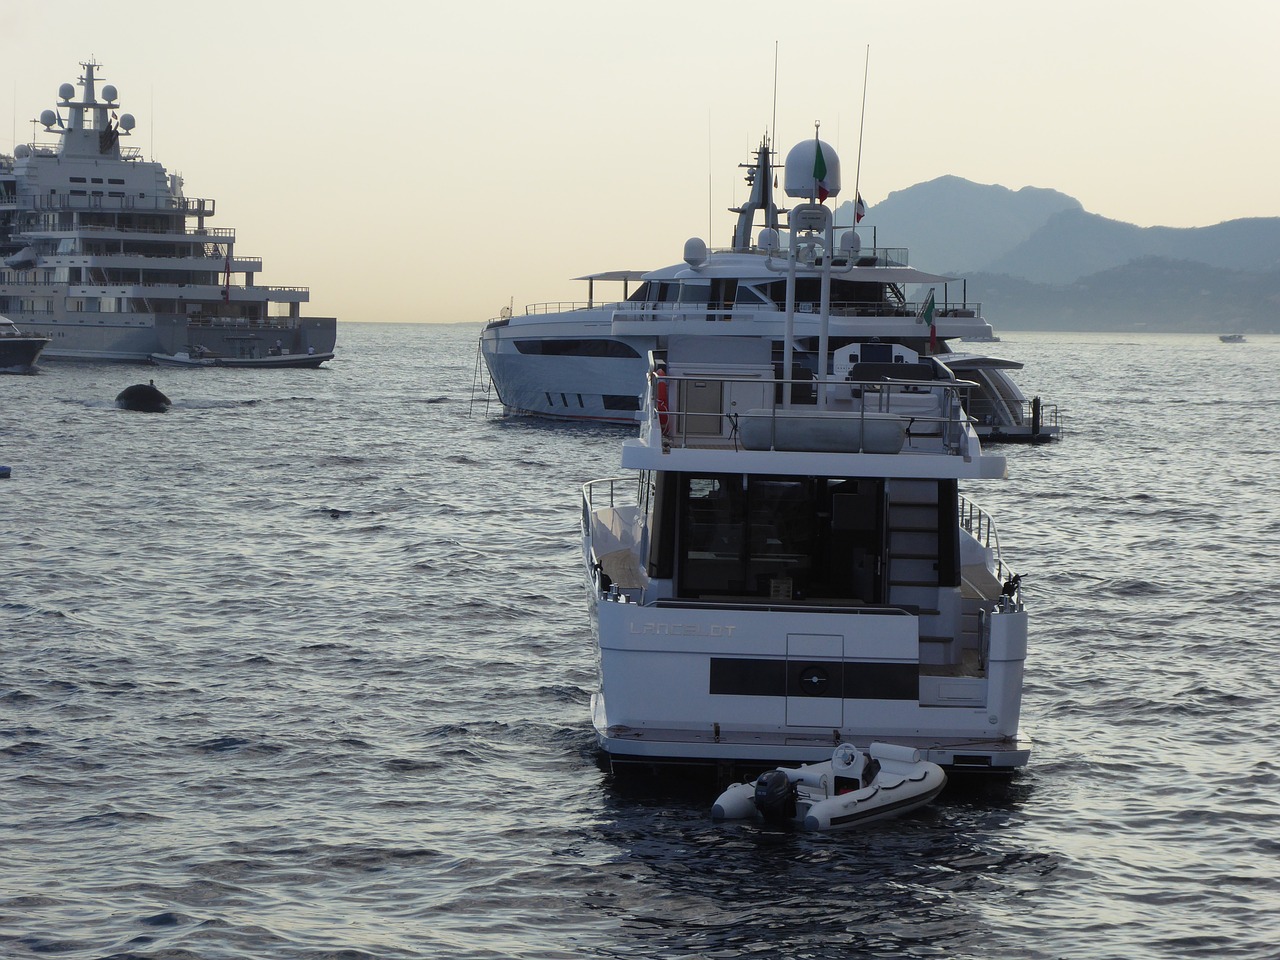 How Do I Find Superyacht Refueling Stations